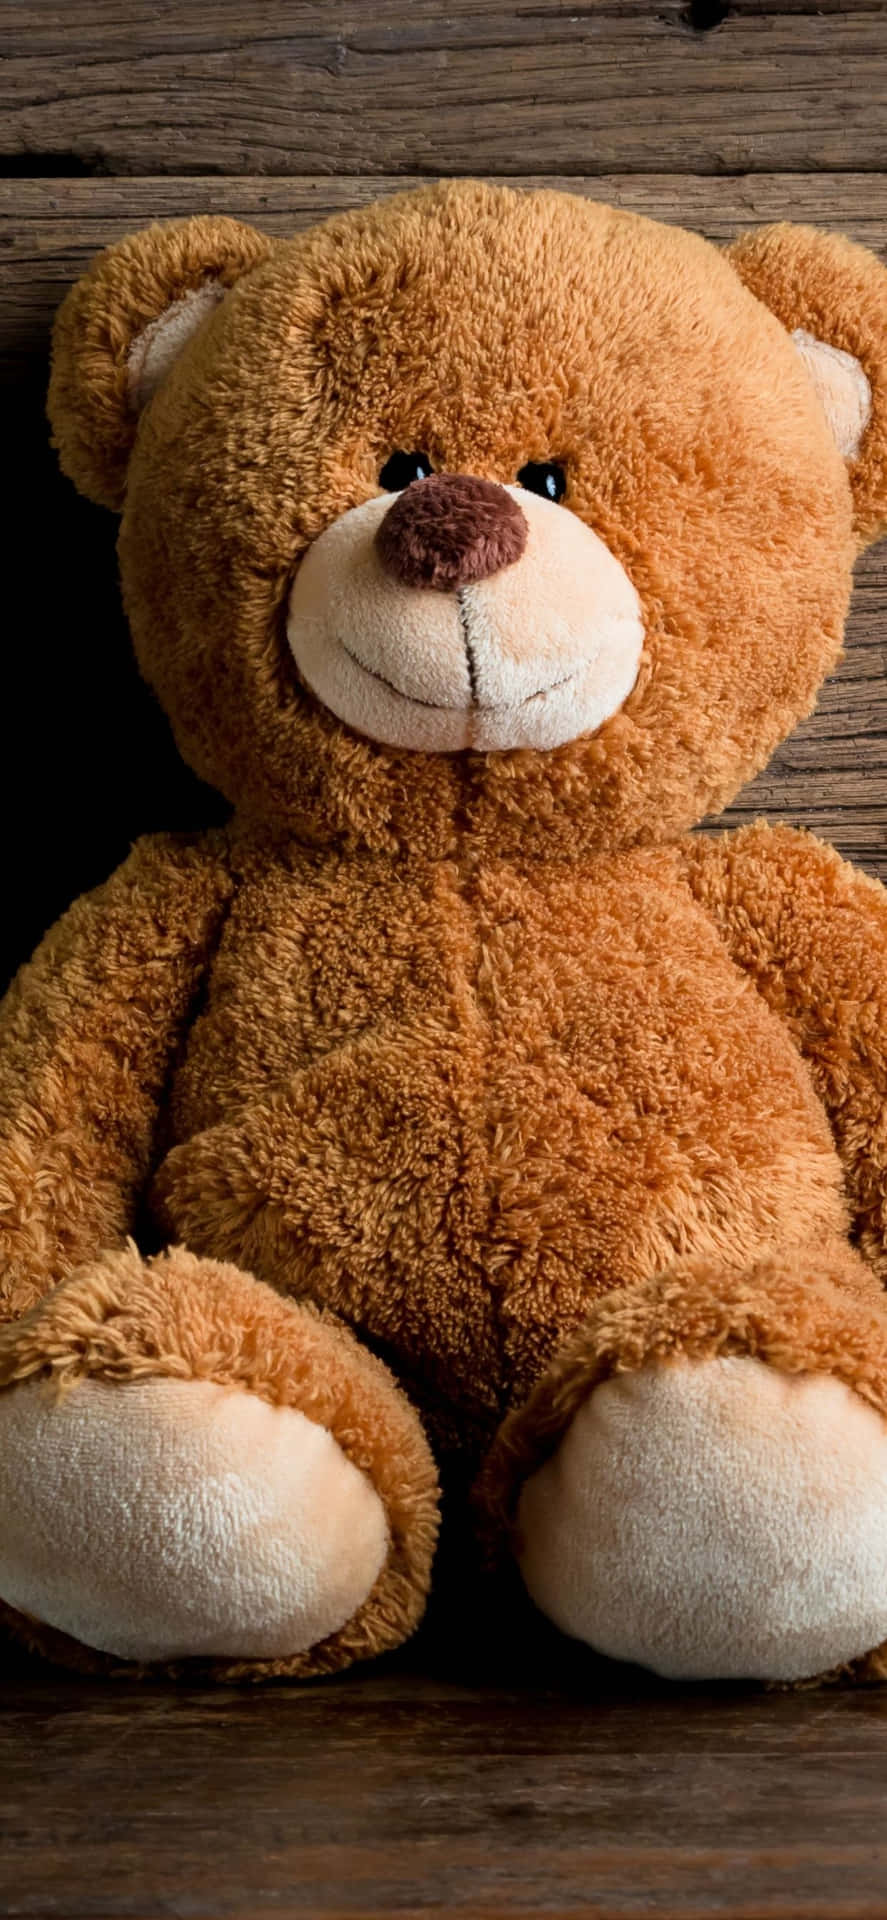 A Brown Teddy Bear Sitting On A Wooden Surface